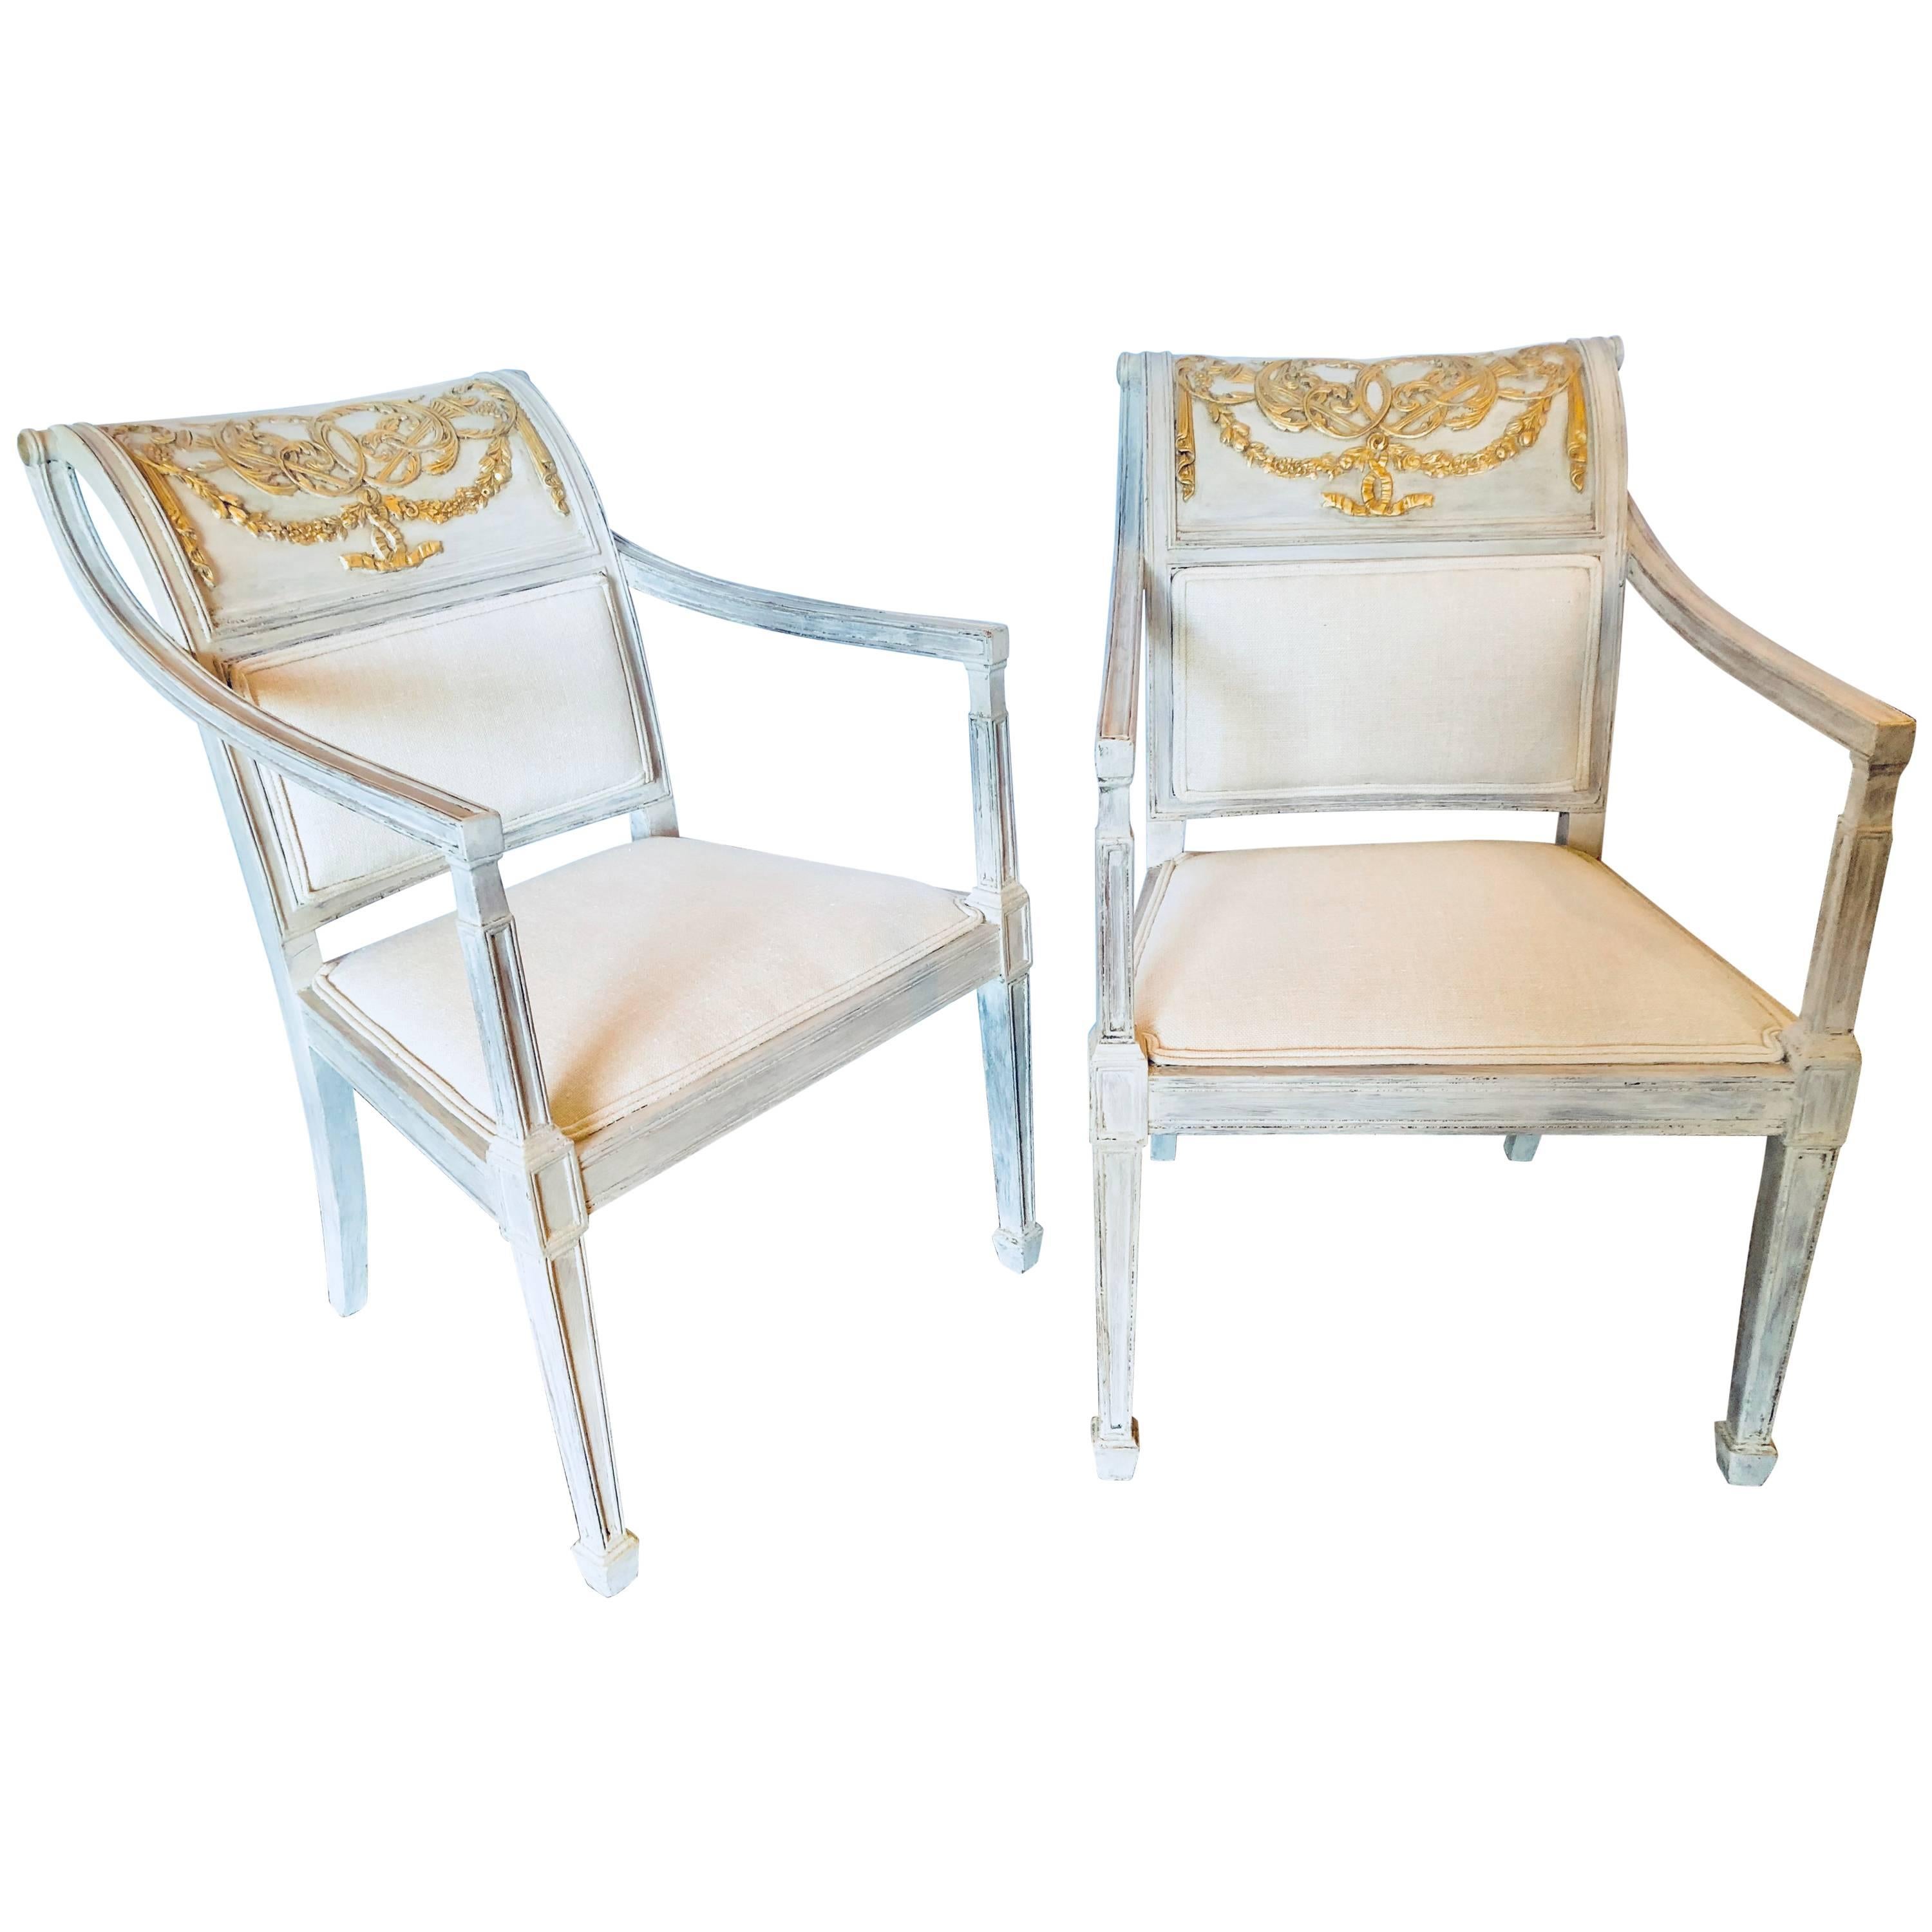 Pair of Swedish and Parcel Gilt Decorated Armchairs in New Fabric